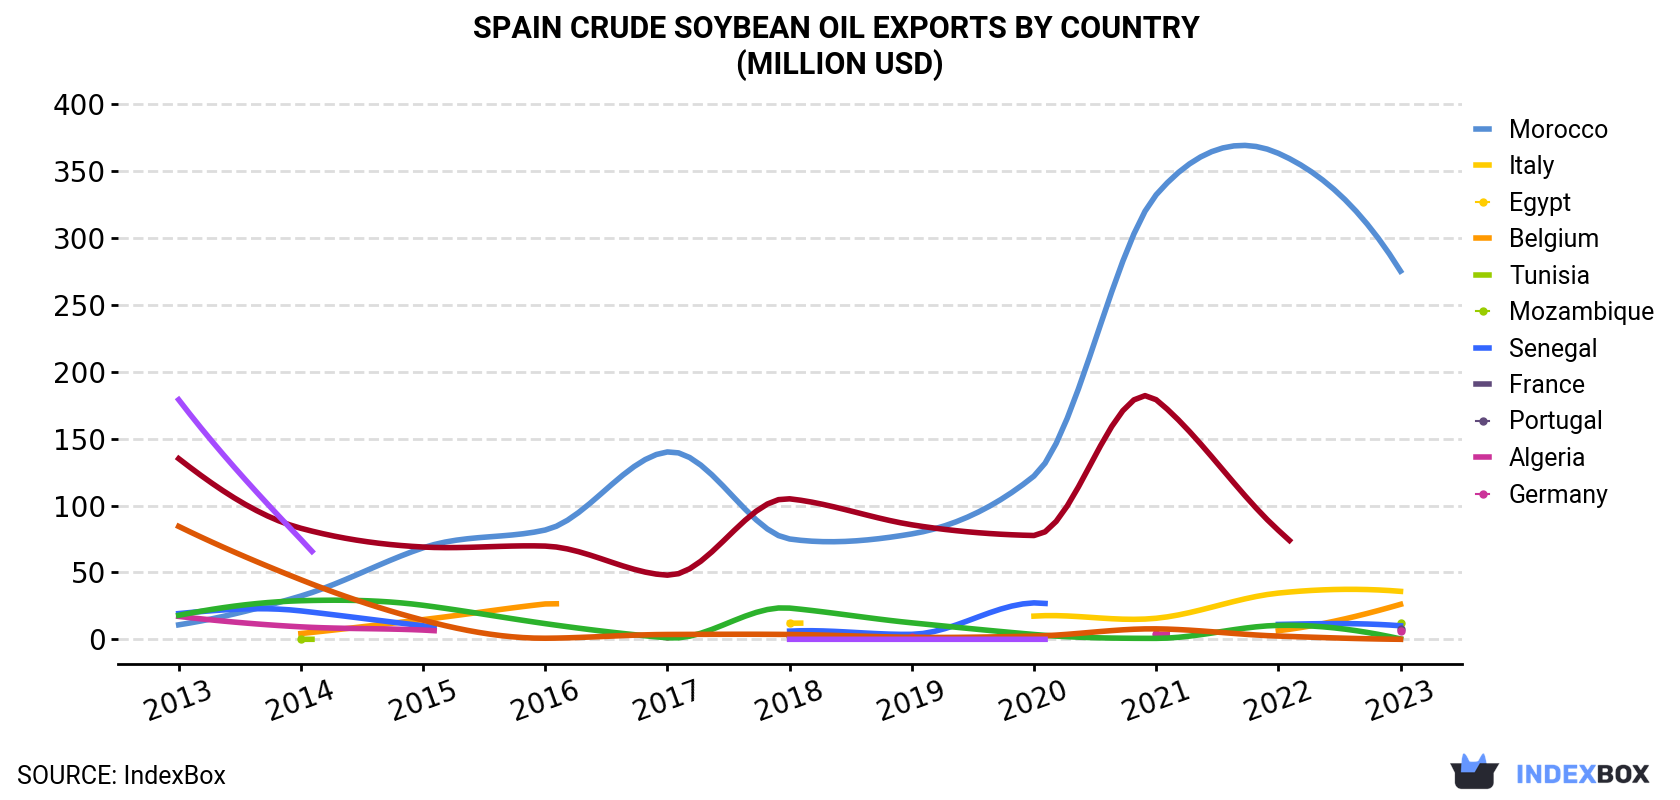 Spain Crude Soybean Oil Exports By Country (Million USD)